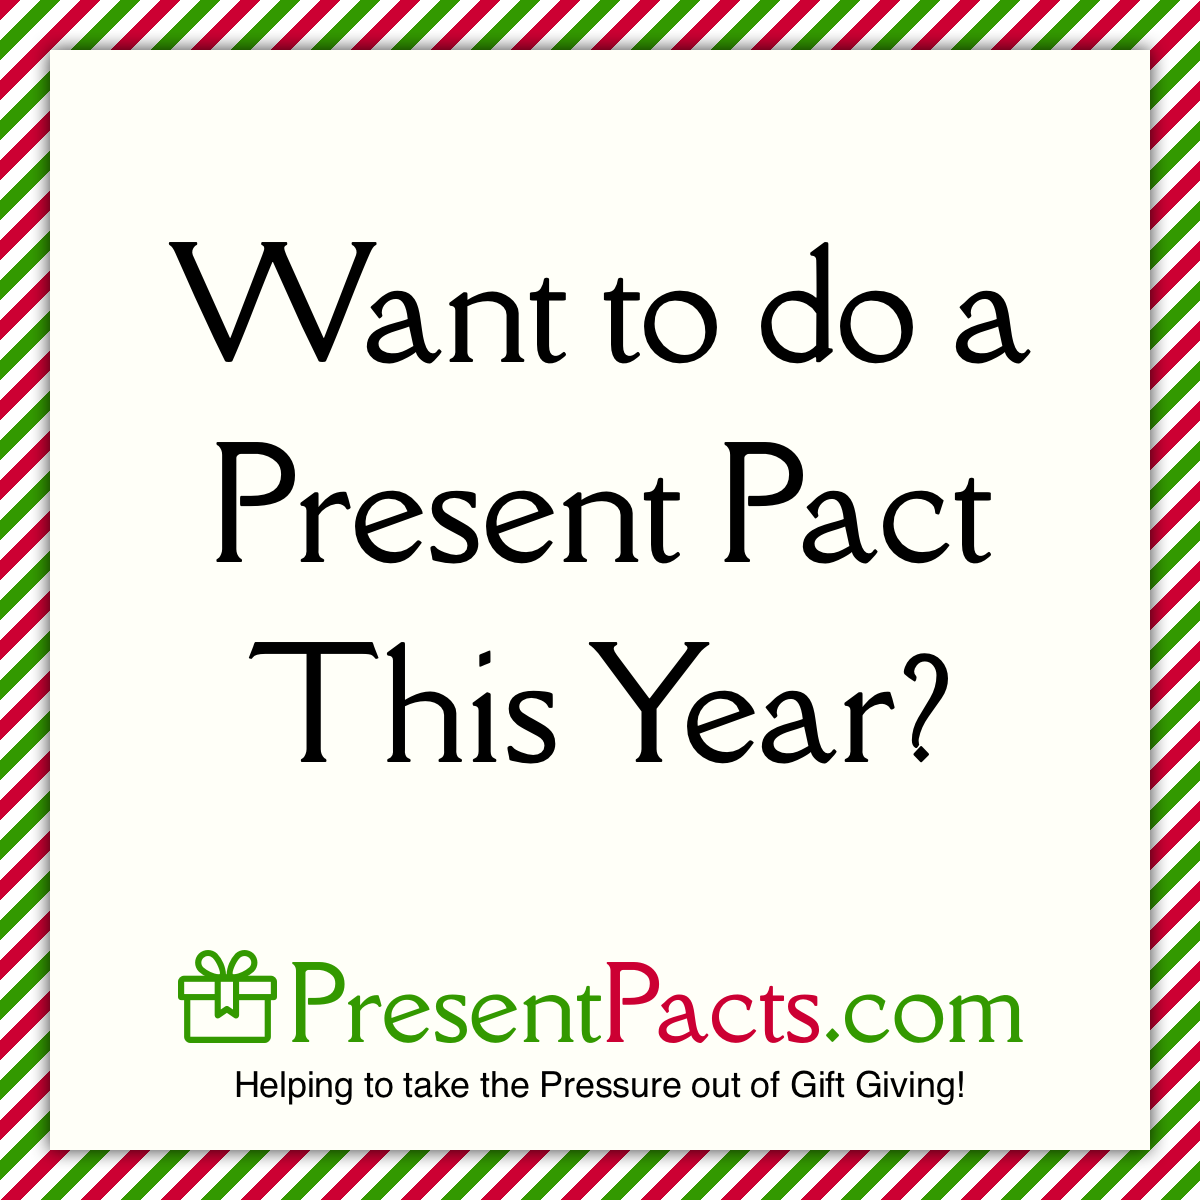 Present Pacts Share image - Want to do a Present Pact This Year?